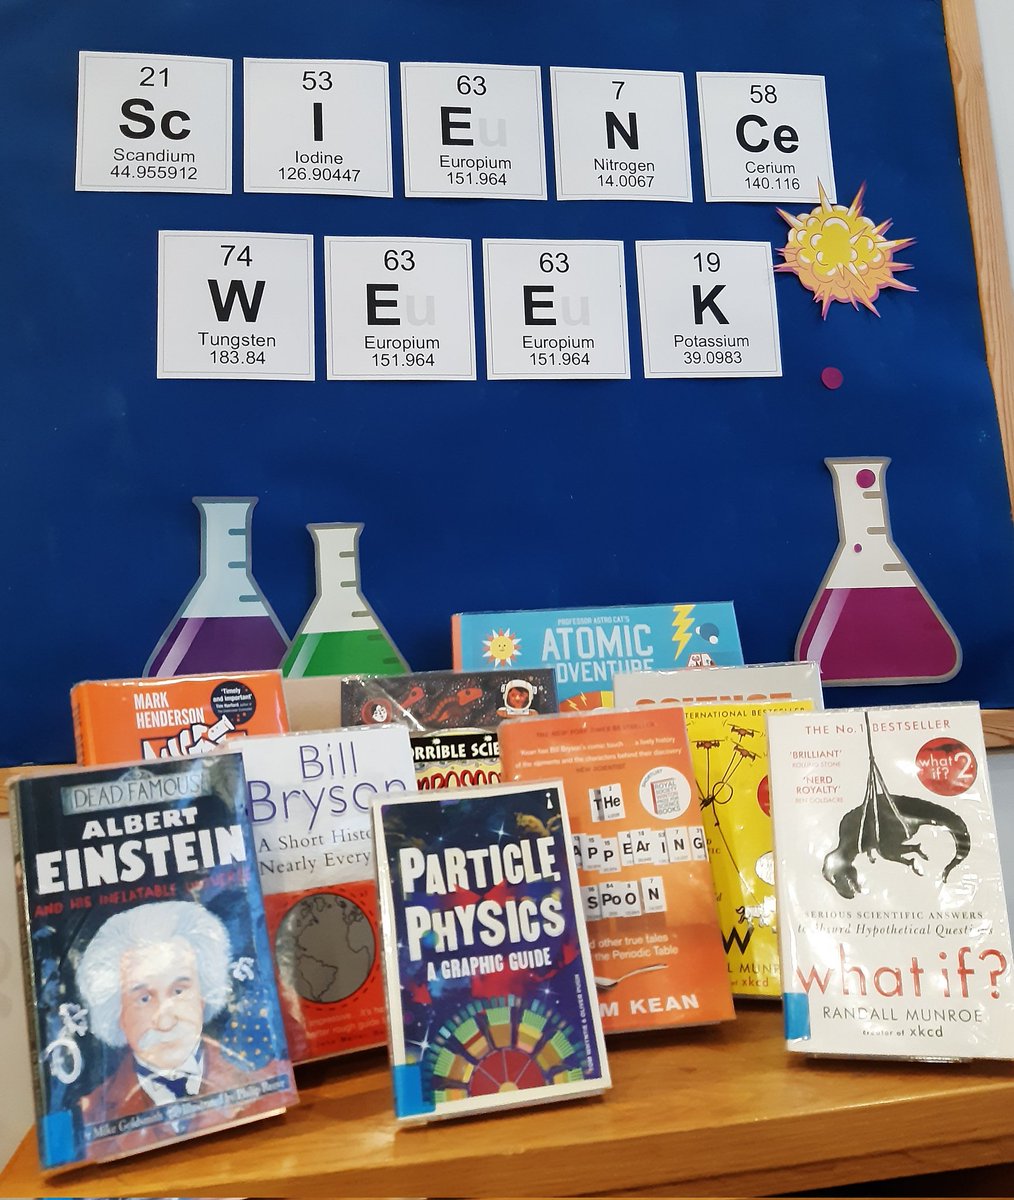 Don't forget to investigate our display for Science Week, and experiment with a book you haven't read before! #BritishScienceWeek2023 #Science #Books 🧪📚